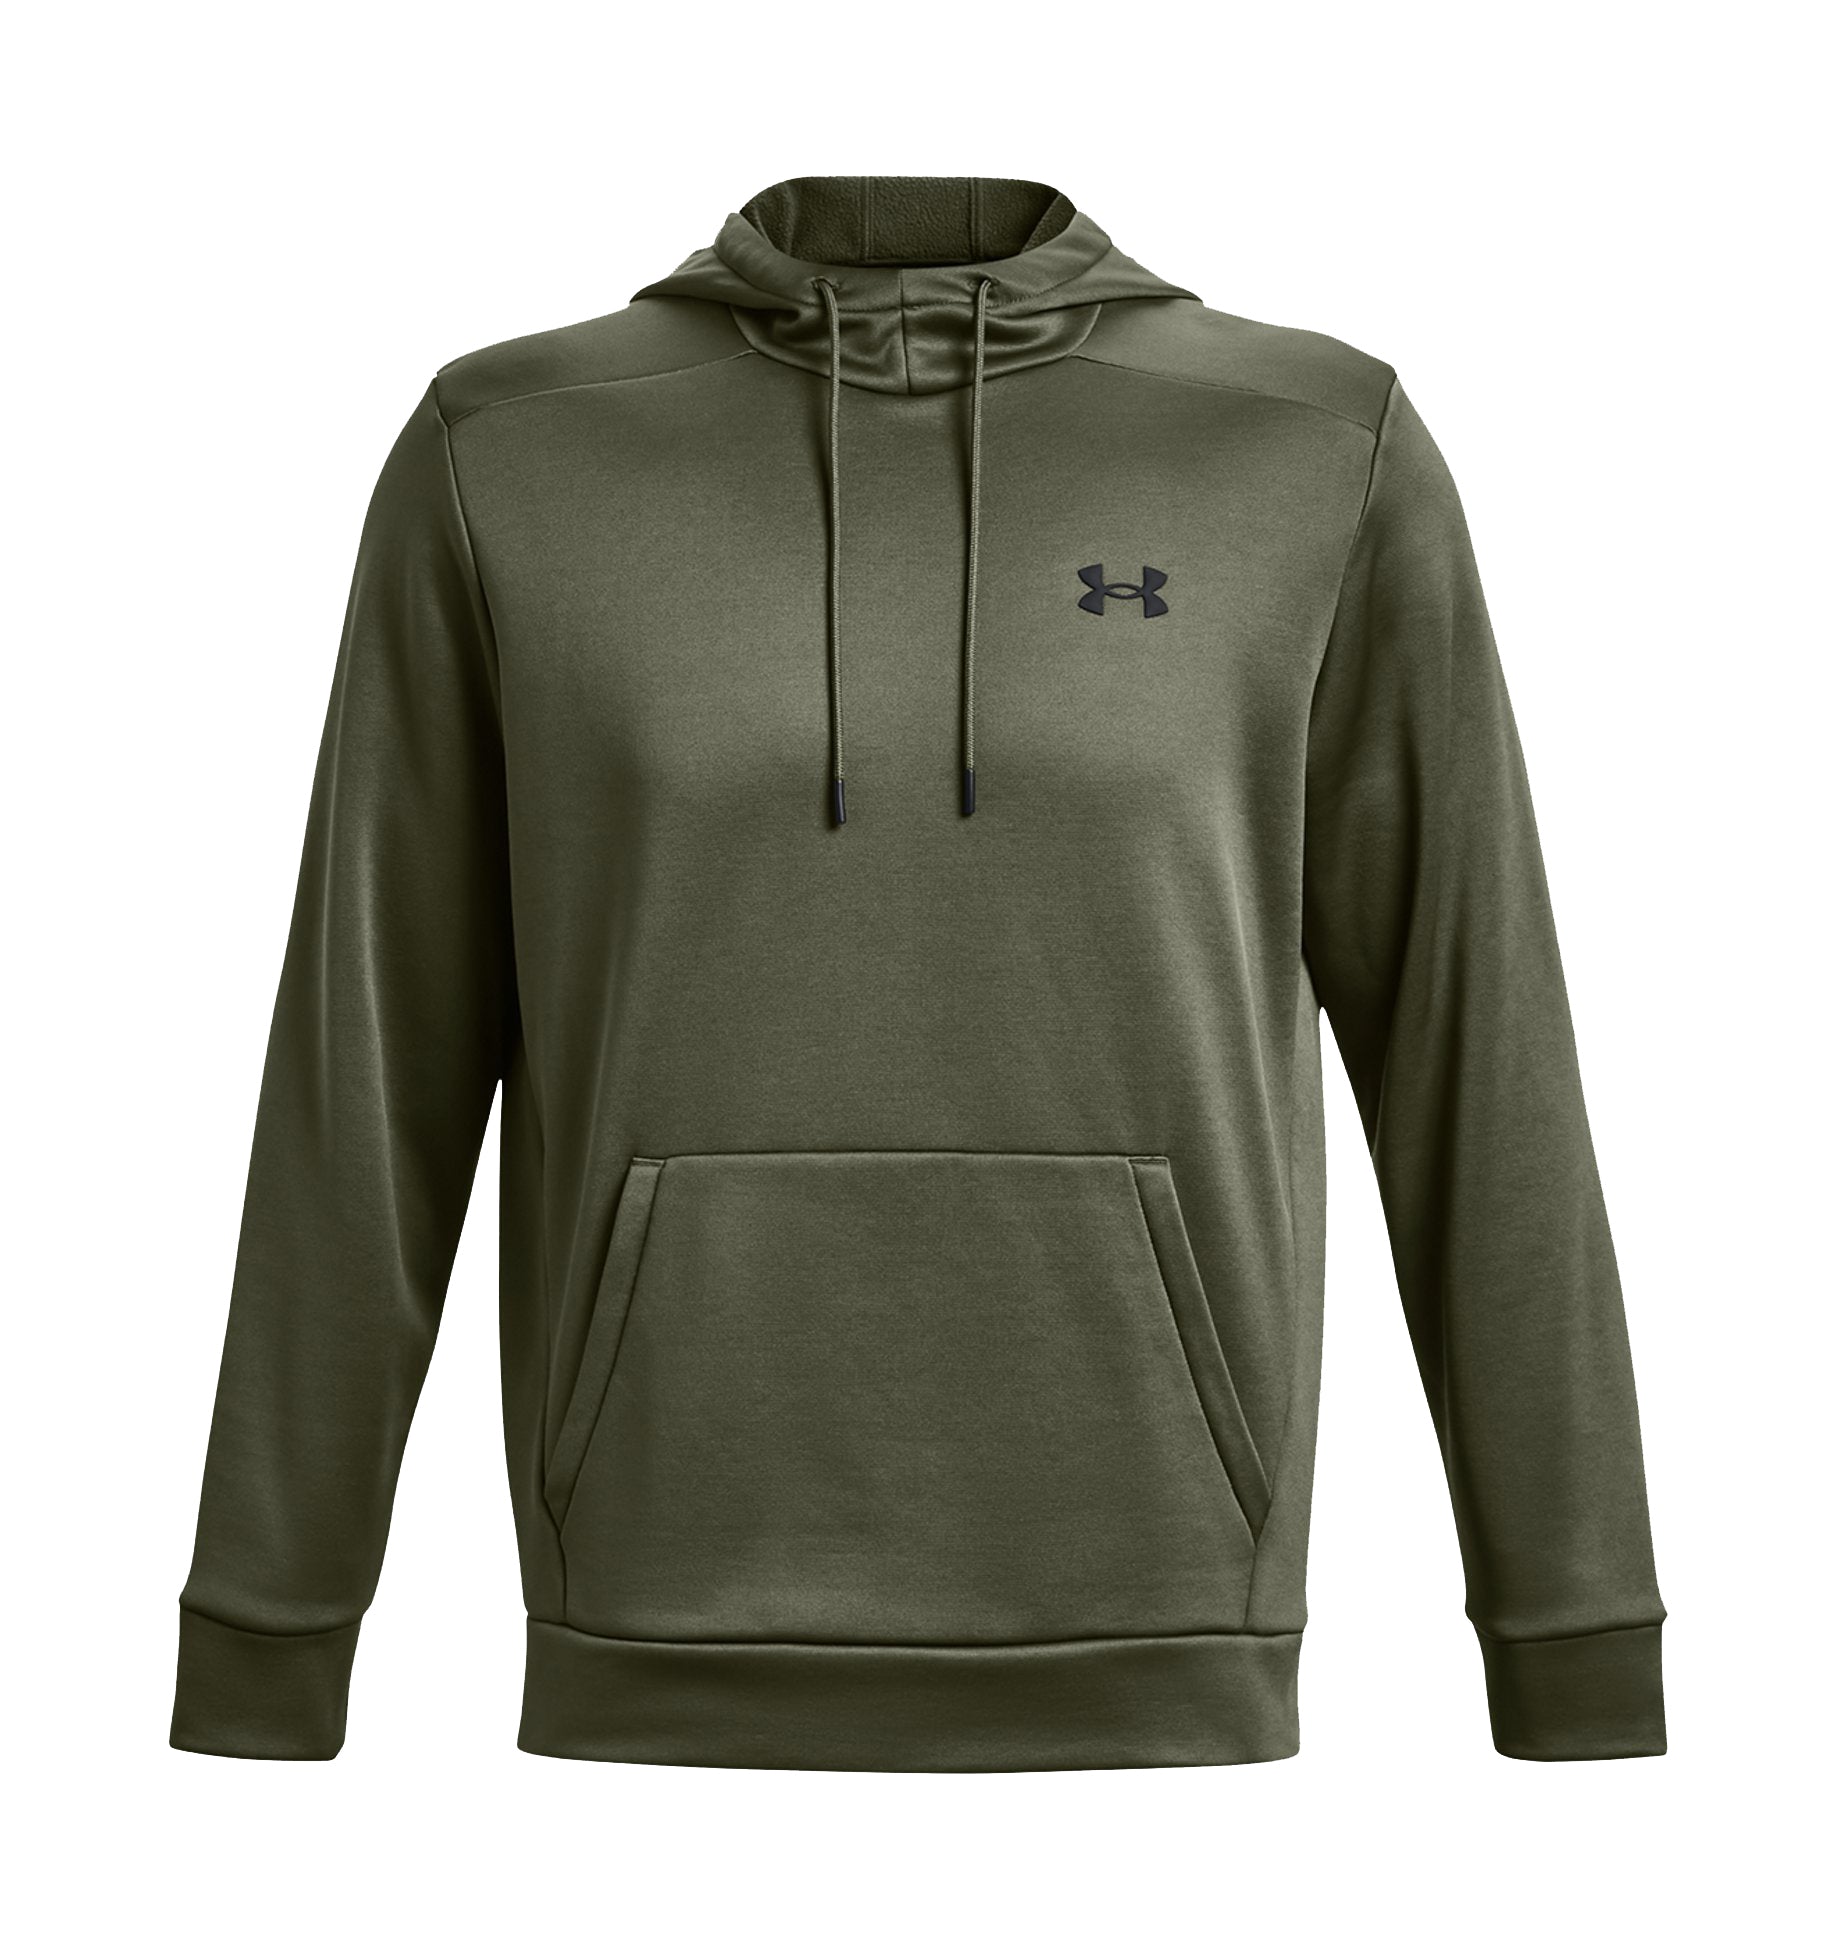  Under Armour Men's Armour Fleece Solid Hoodie , Pitch